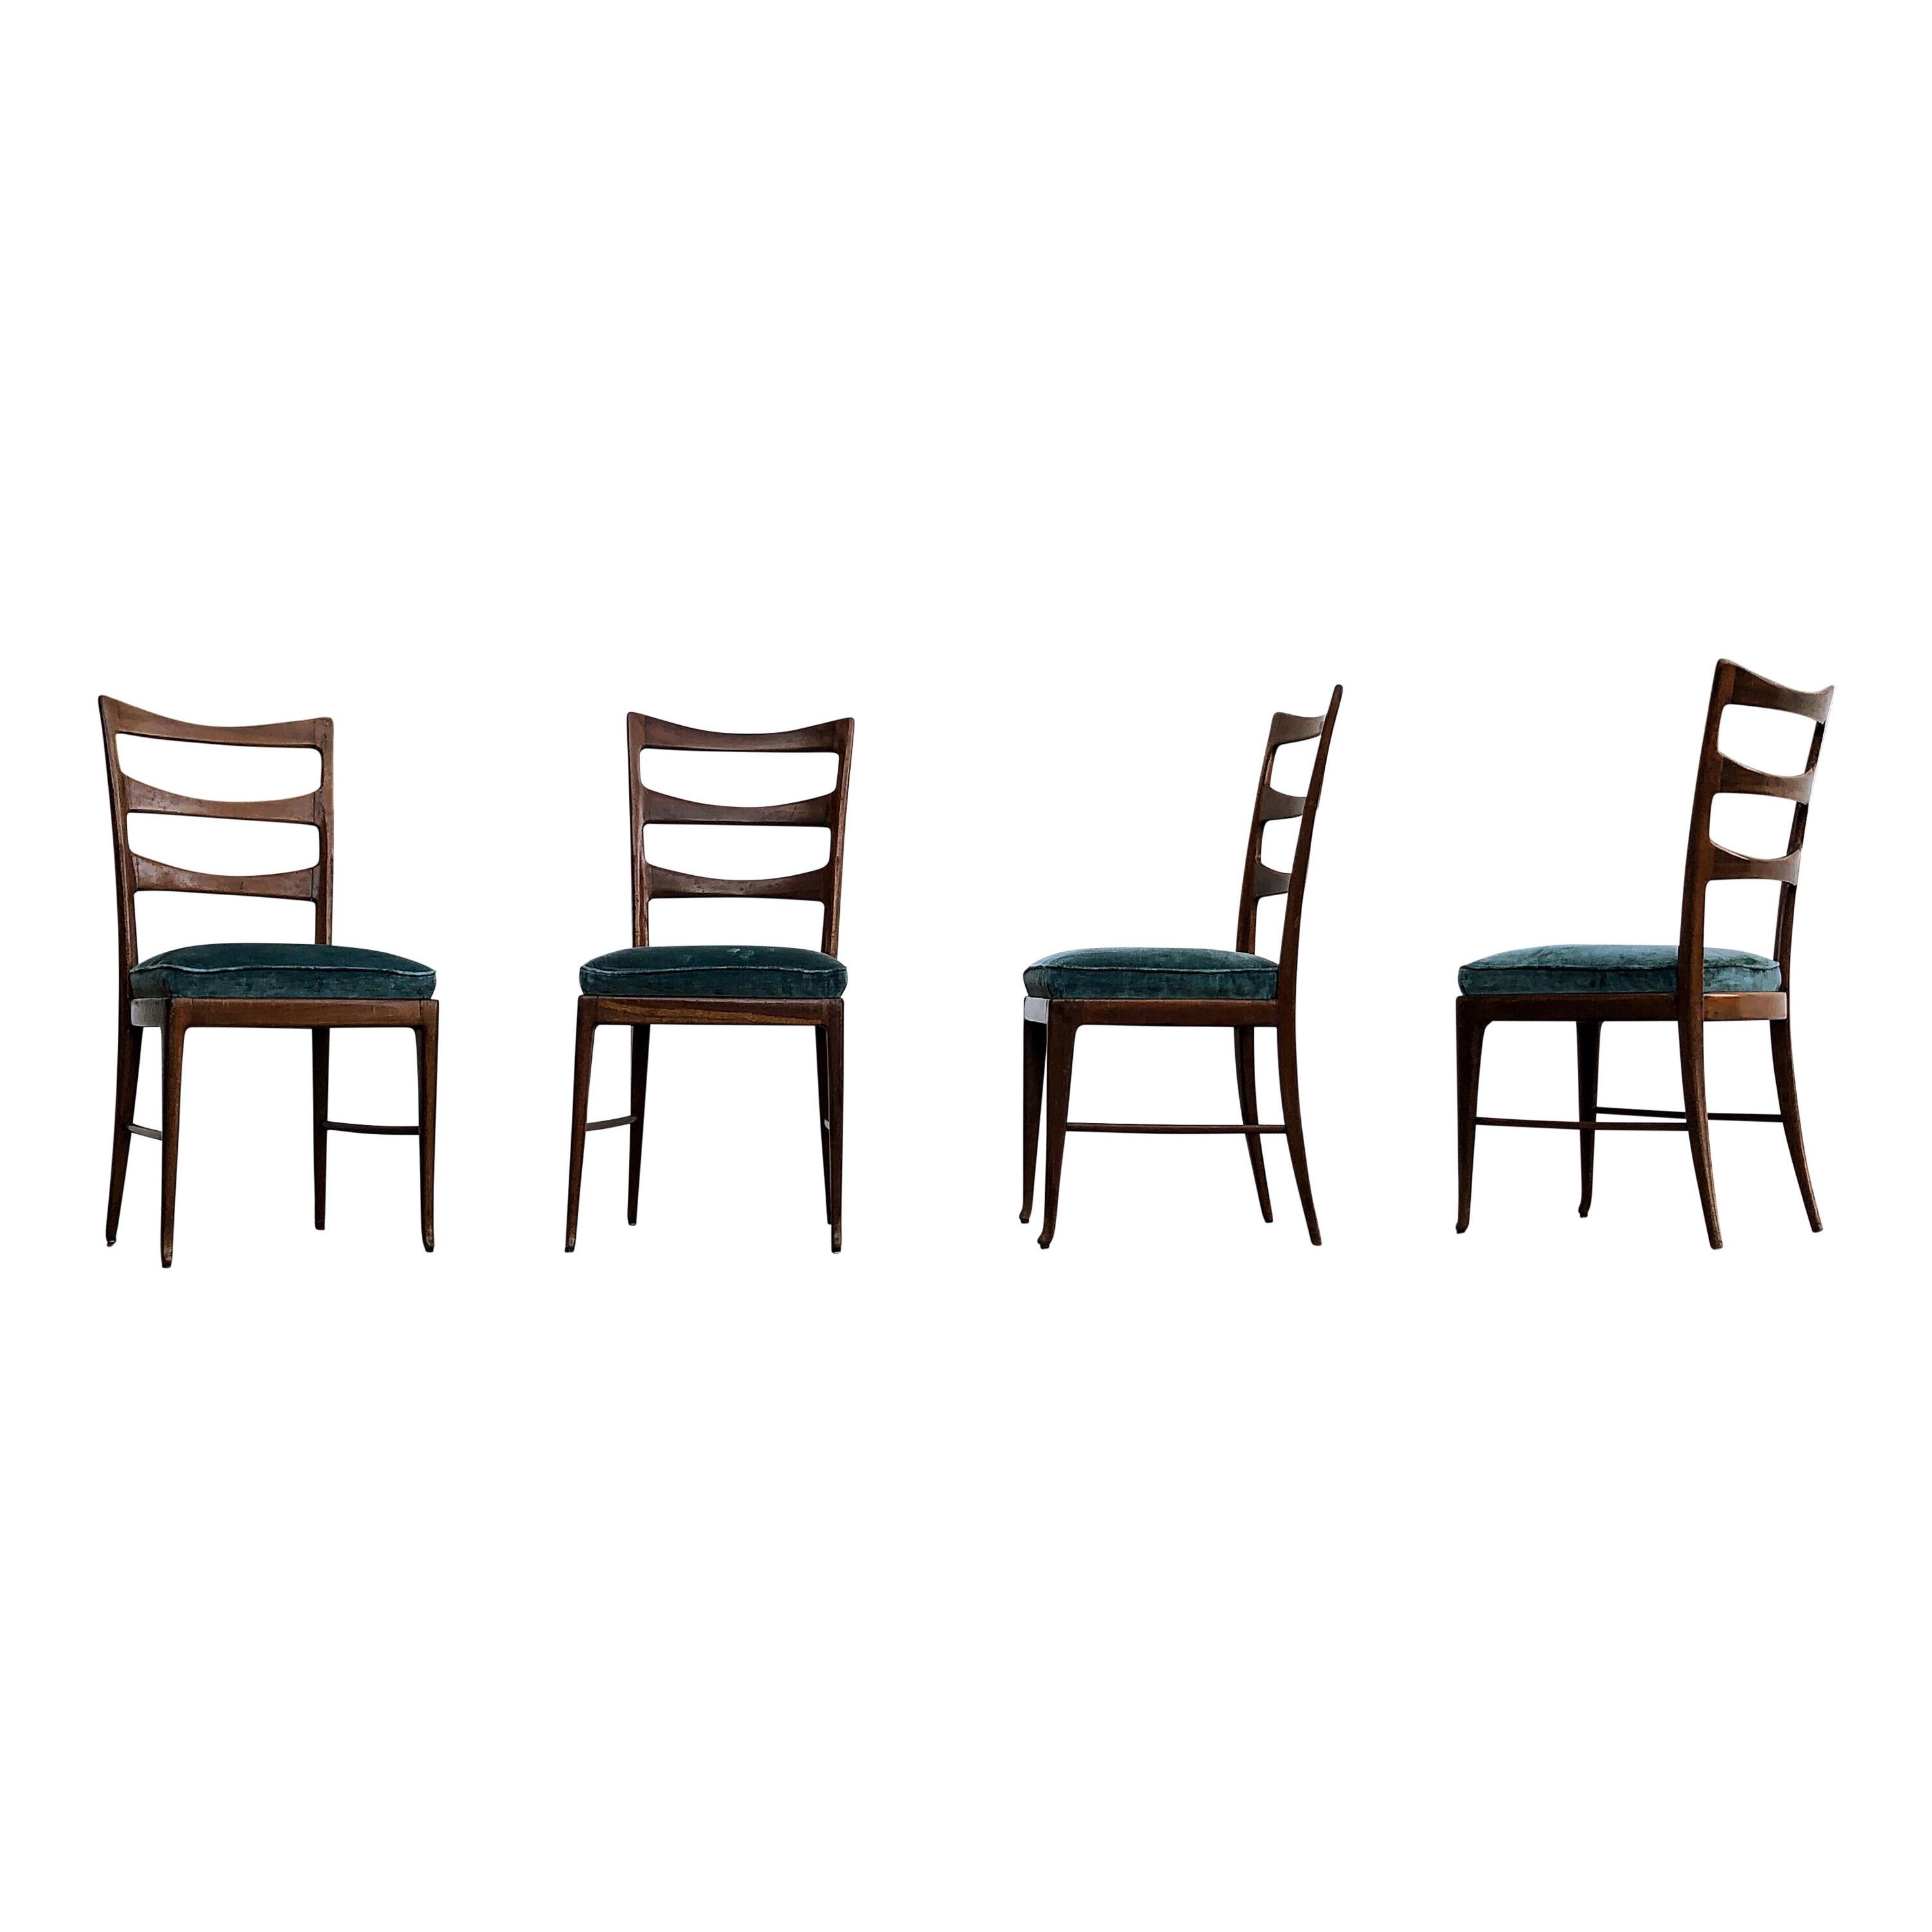 Paolo Buffa Midcentury Walnut and Emerald Velvet Dining Chairs, 1948, Set of 4 For Sale